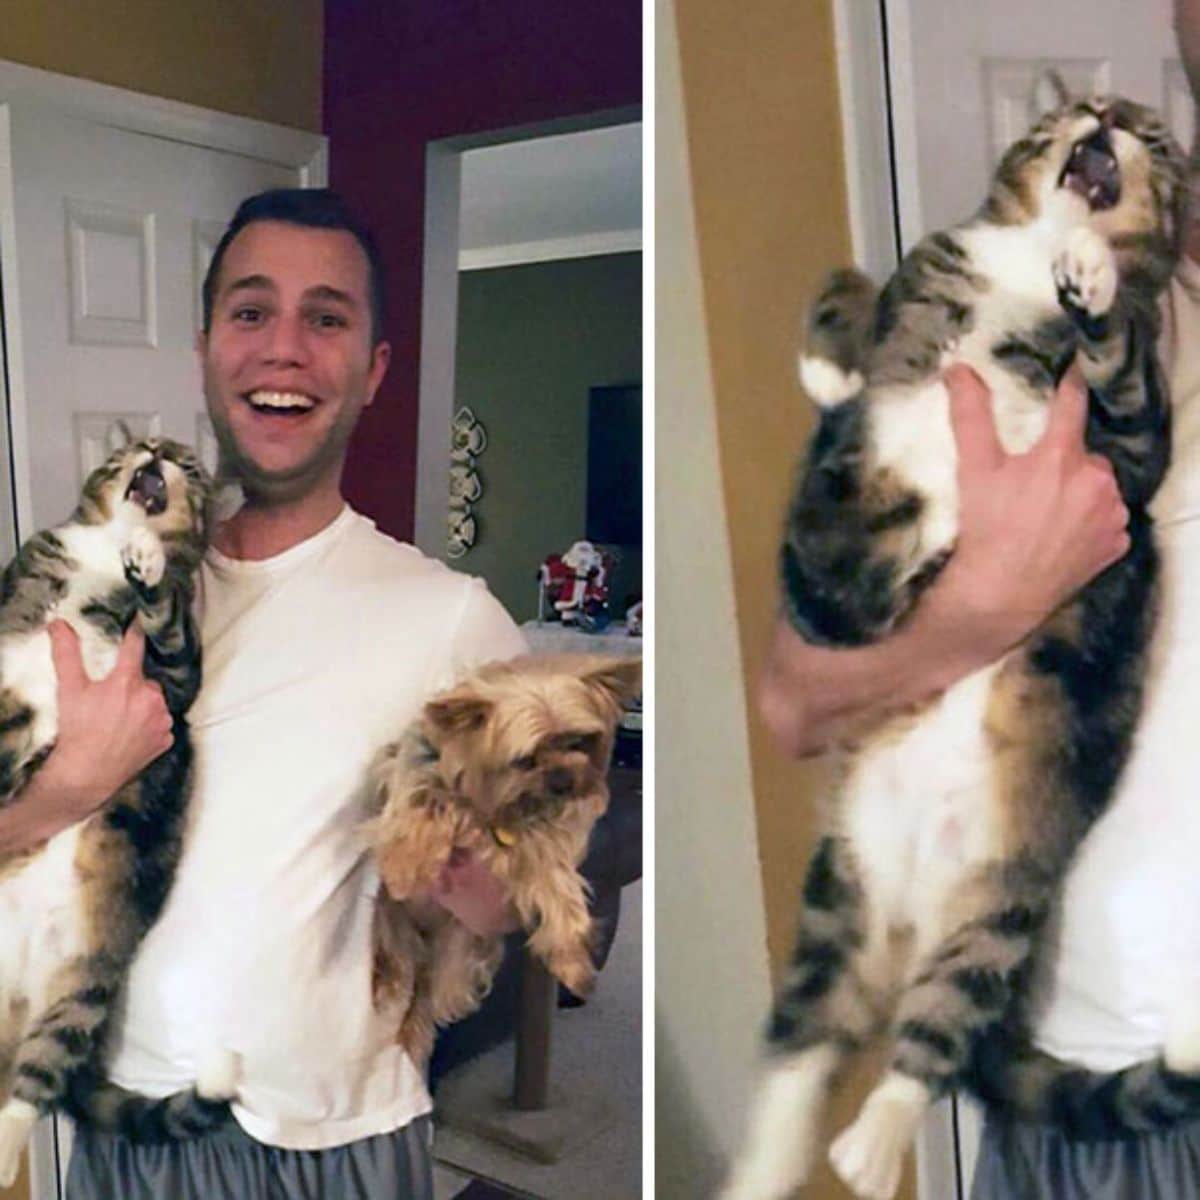 a man holding a screaming grey and white tabby cat on one hand and a fluffy brown small dog on the other and seocnd photo of a close up of the cat